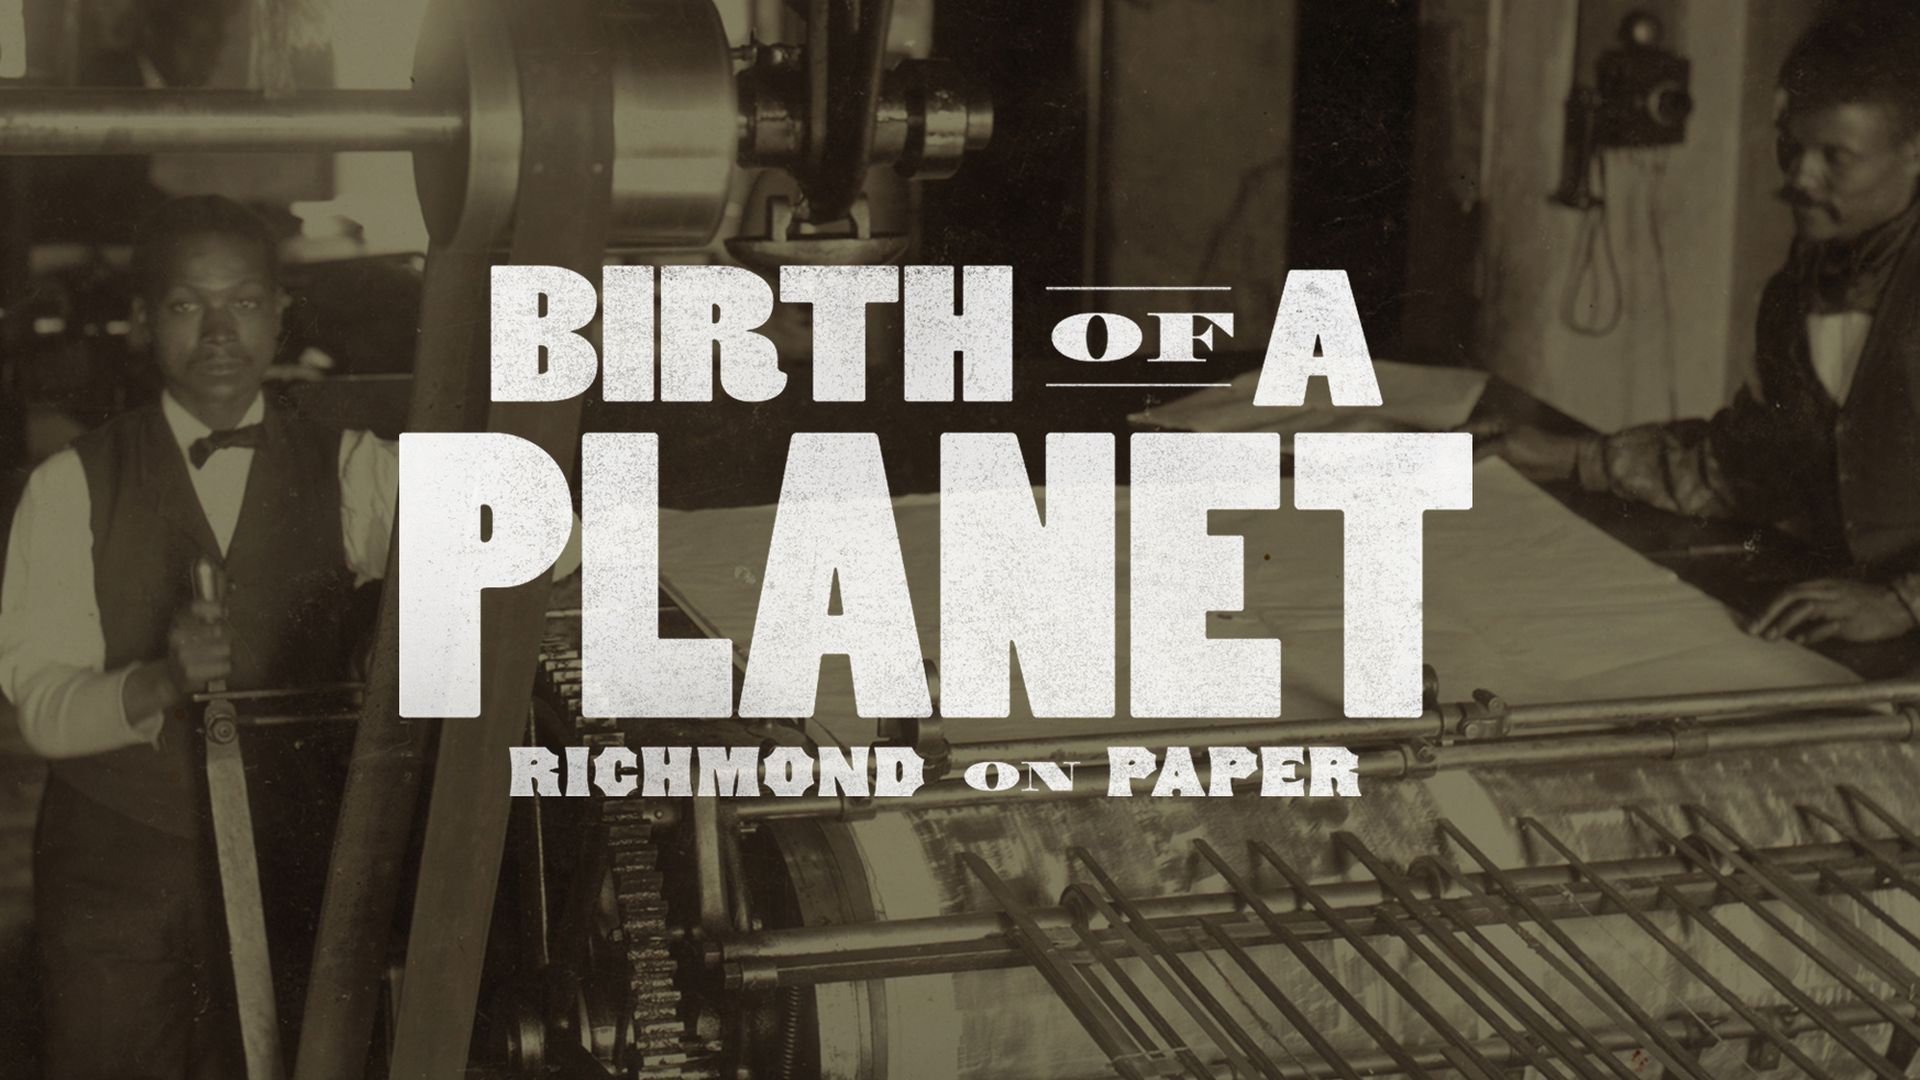 A picture that says "Birth of a Planet Richmond on Paper" with a printing press behind it.